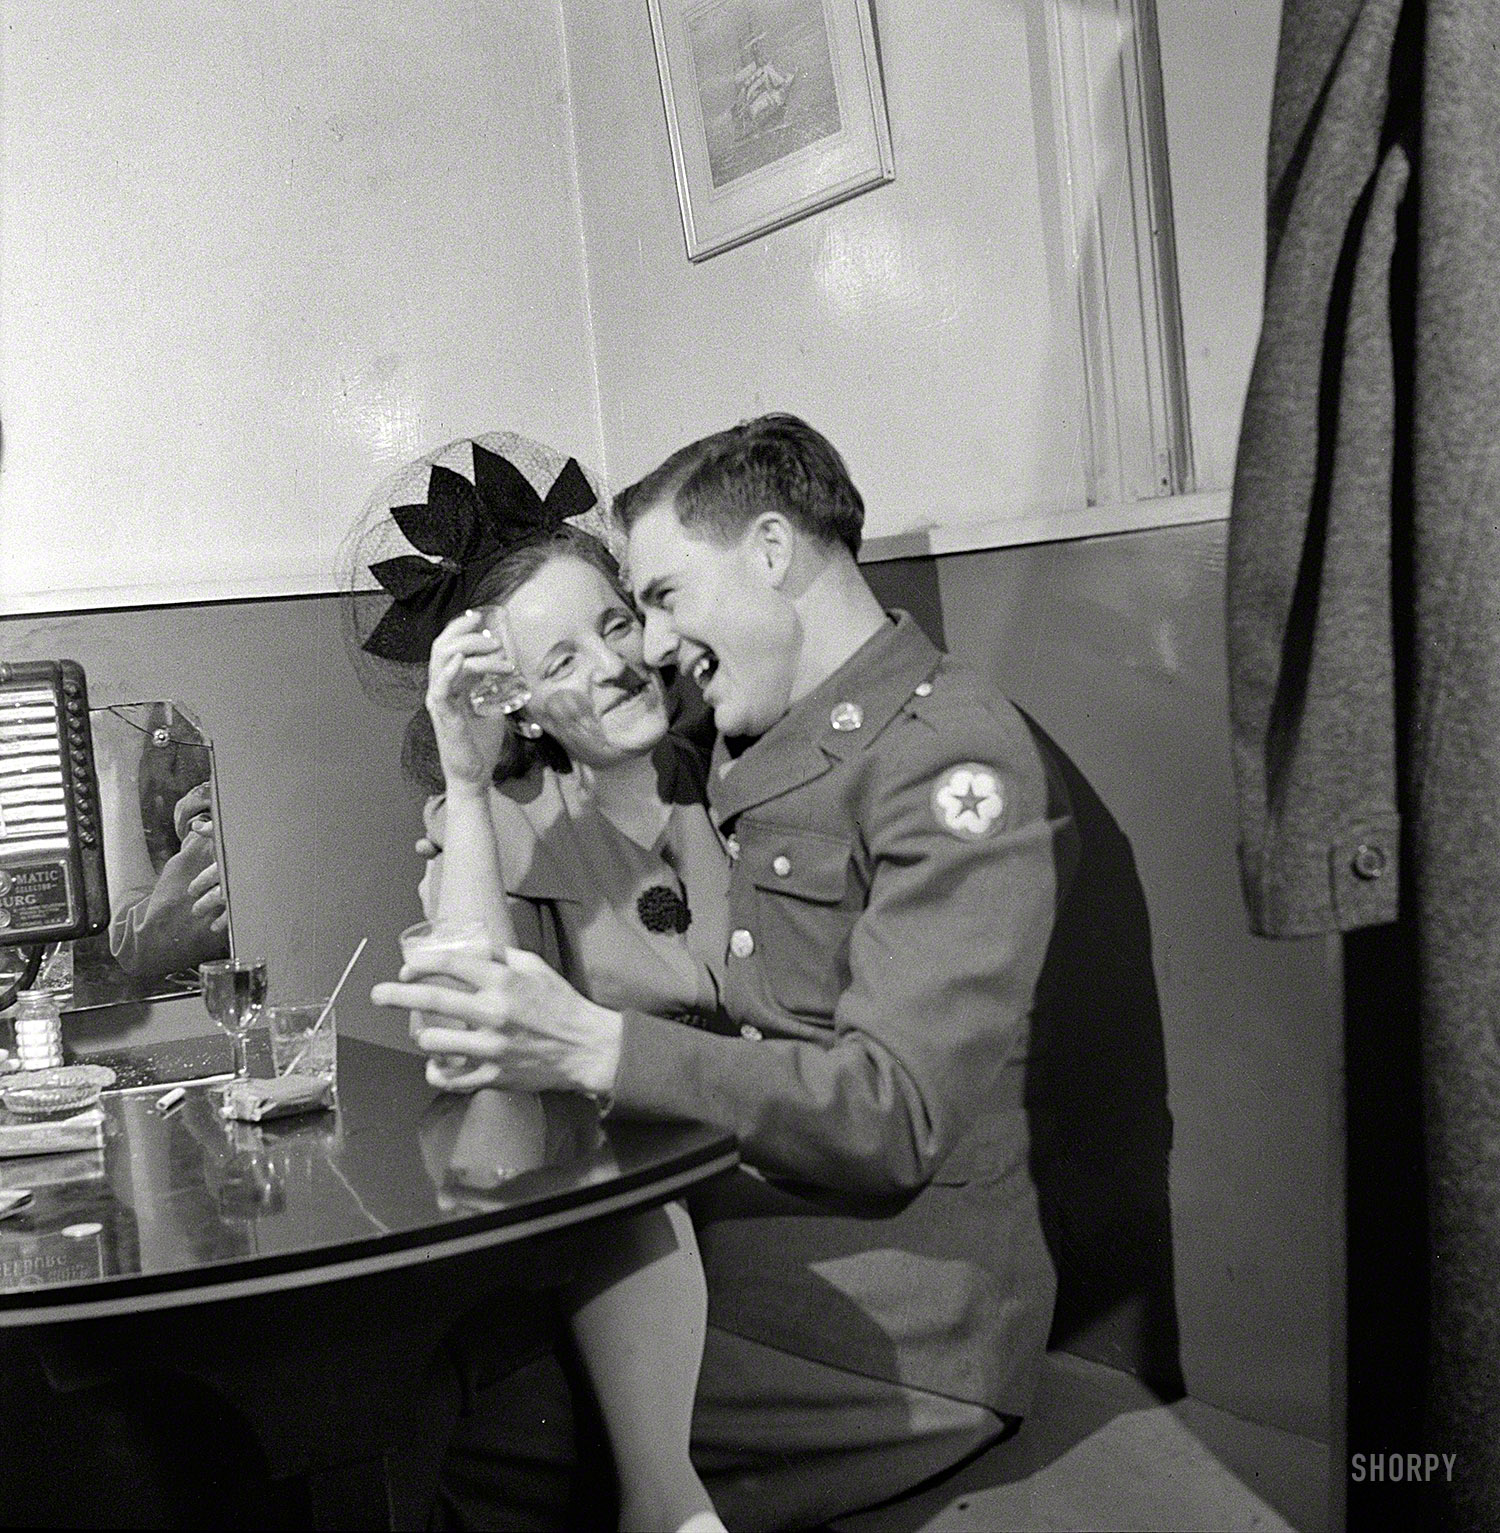 April 1943. Washington, D.C. "Slightly inebriated couple at the Sea Grill." Photo by Esther Bubley for the Office of War Information. View full size.